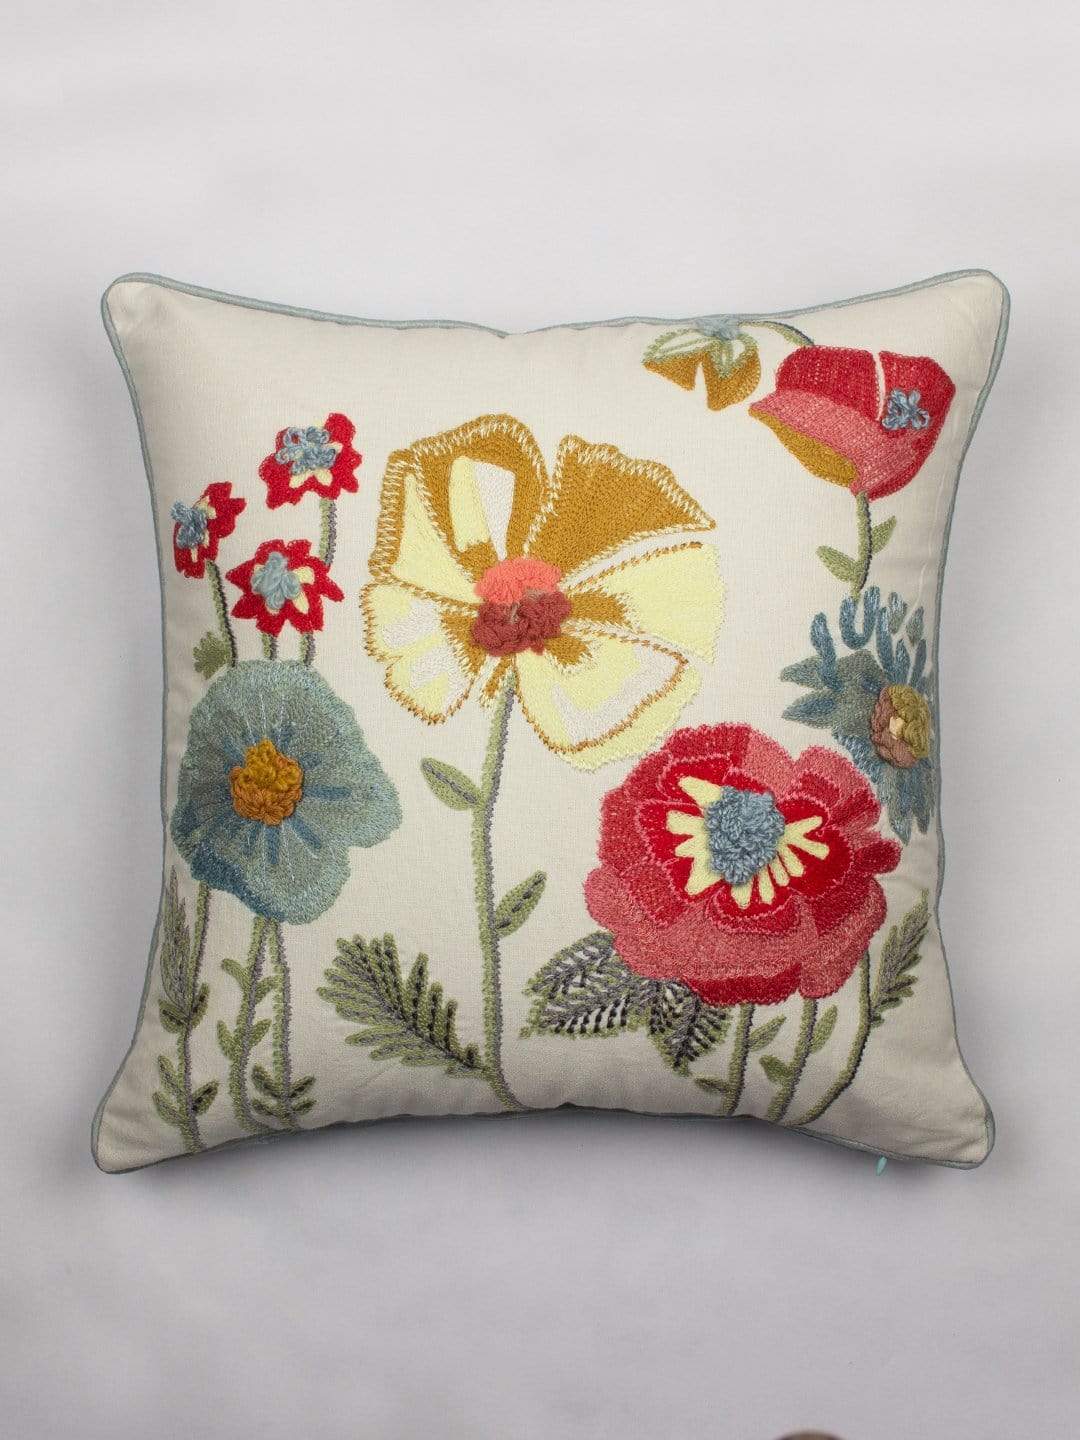 Poppy Embroidered Cushion CoverMaterial: Front - 100% Cotton , Back- 100% Polyester
Dimensions: 18 x 18 Inch

Dry Clean only

 Poppy Embroidered Cushion CoverThe Wishing Chair